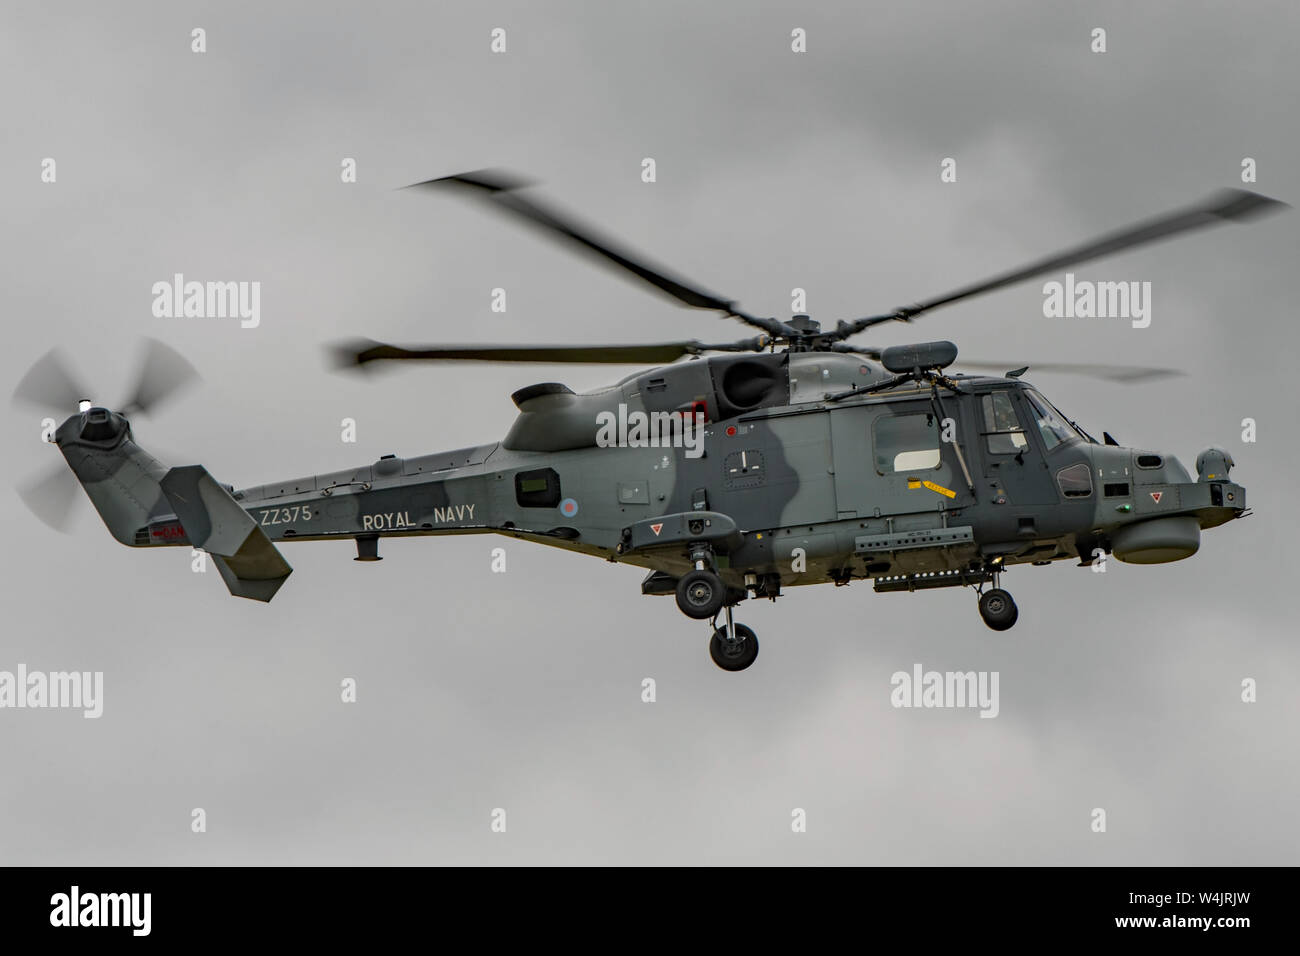 Royal Navy Wildcat HMA2 anti-submarine helicopter participating in the flying display at the RNAS Yeovilton International Air Day, UK on 13/7/19. Stock Photo